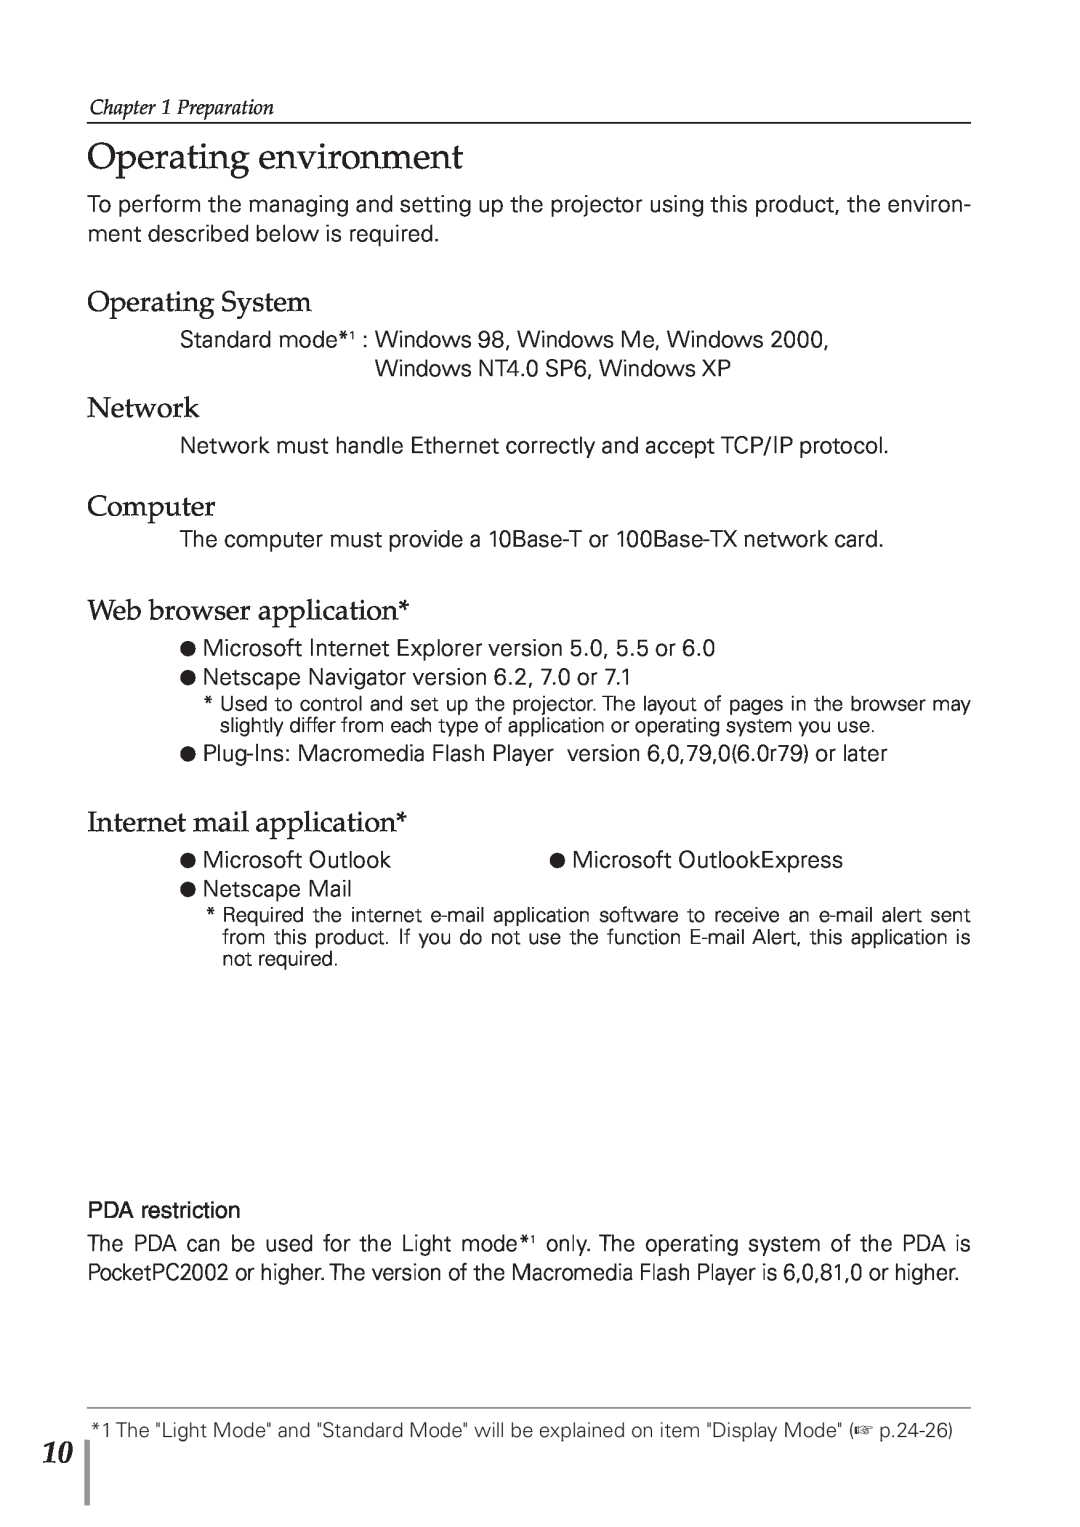 Eiki PJNET-300 Operating environment, Operating System, Network, Computer, Web browser application, Microsoft Outlook 